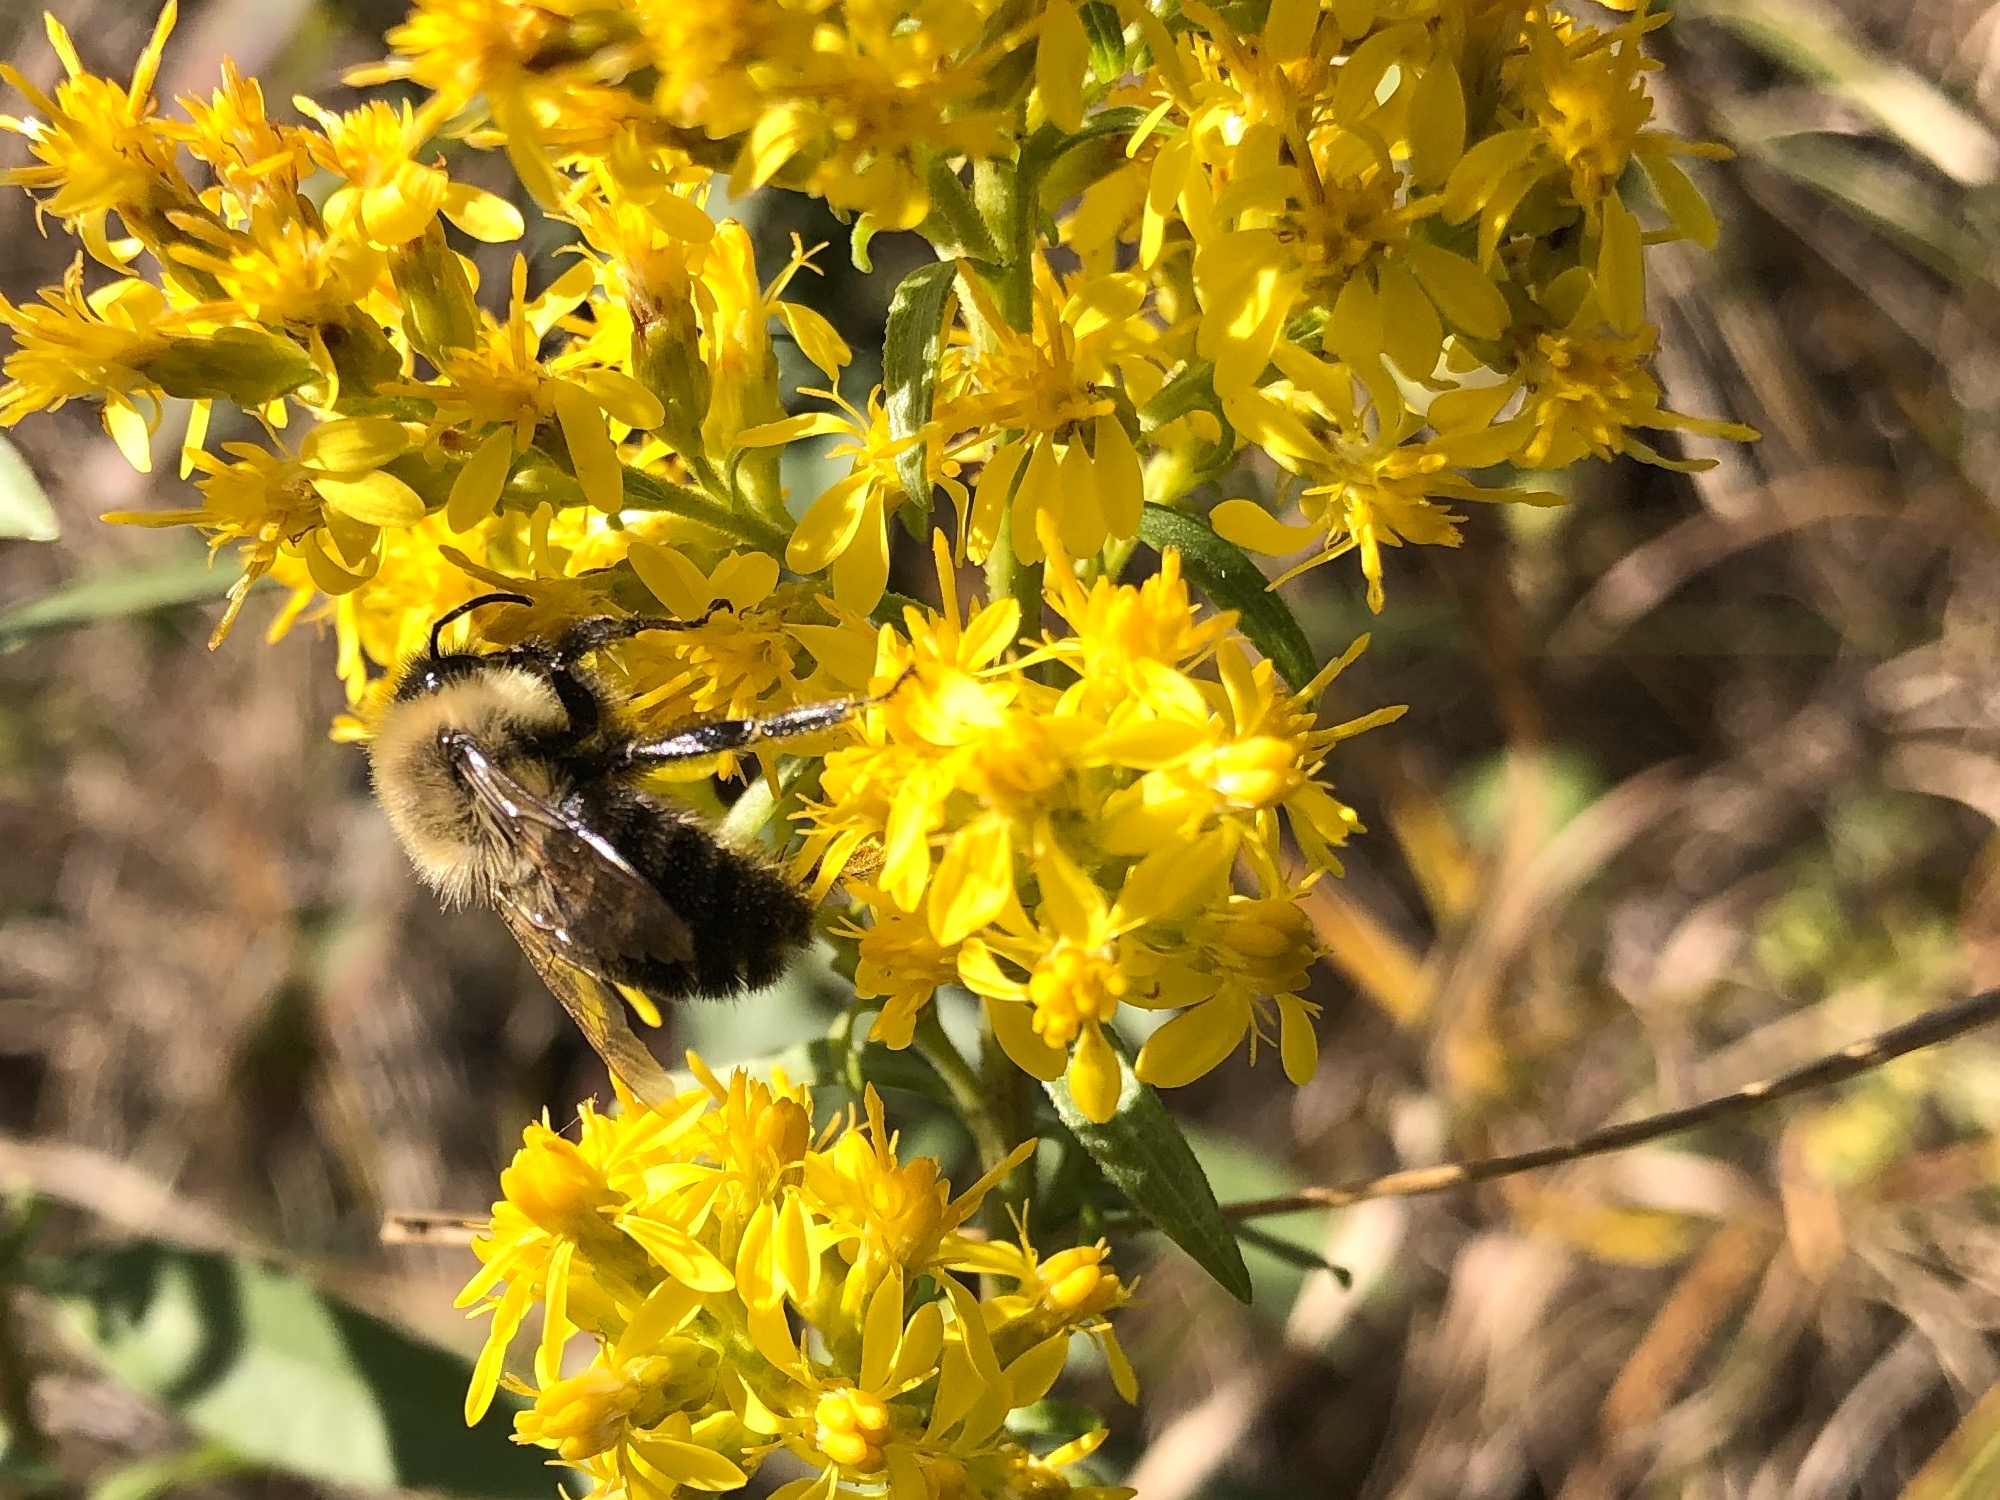 Bumblebee on Showy Goldenrod on October 7, 2020.